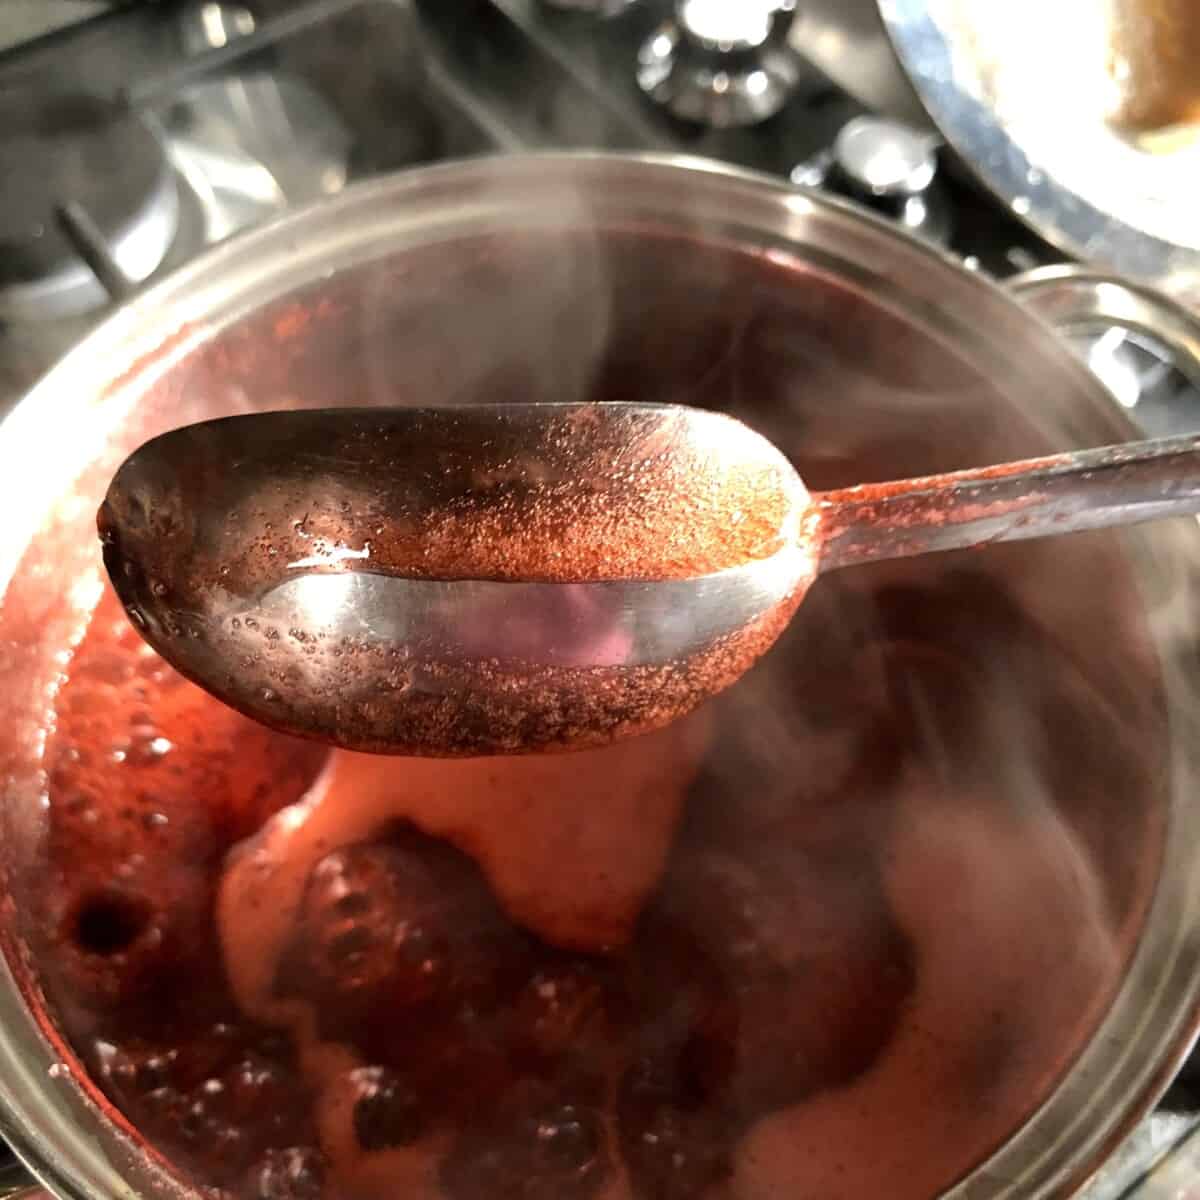 a spoon with homemade fruit sauce and a finger has swiped horizontally across the back of the spoon leaving a clean spot that the sauce is not dripping into